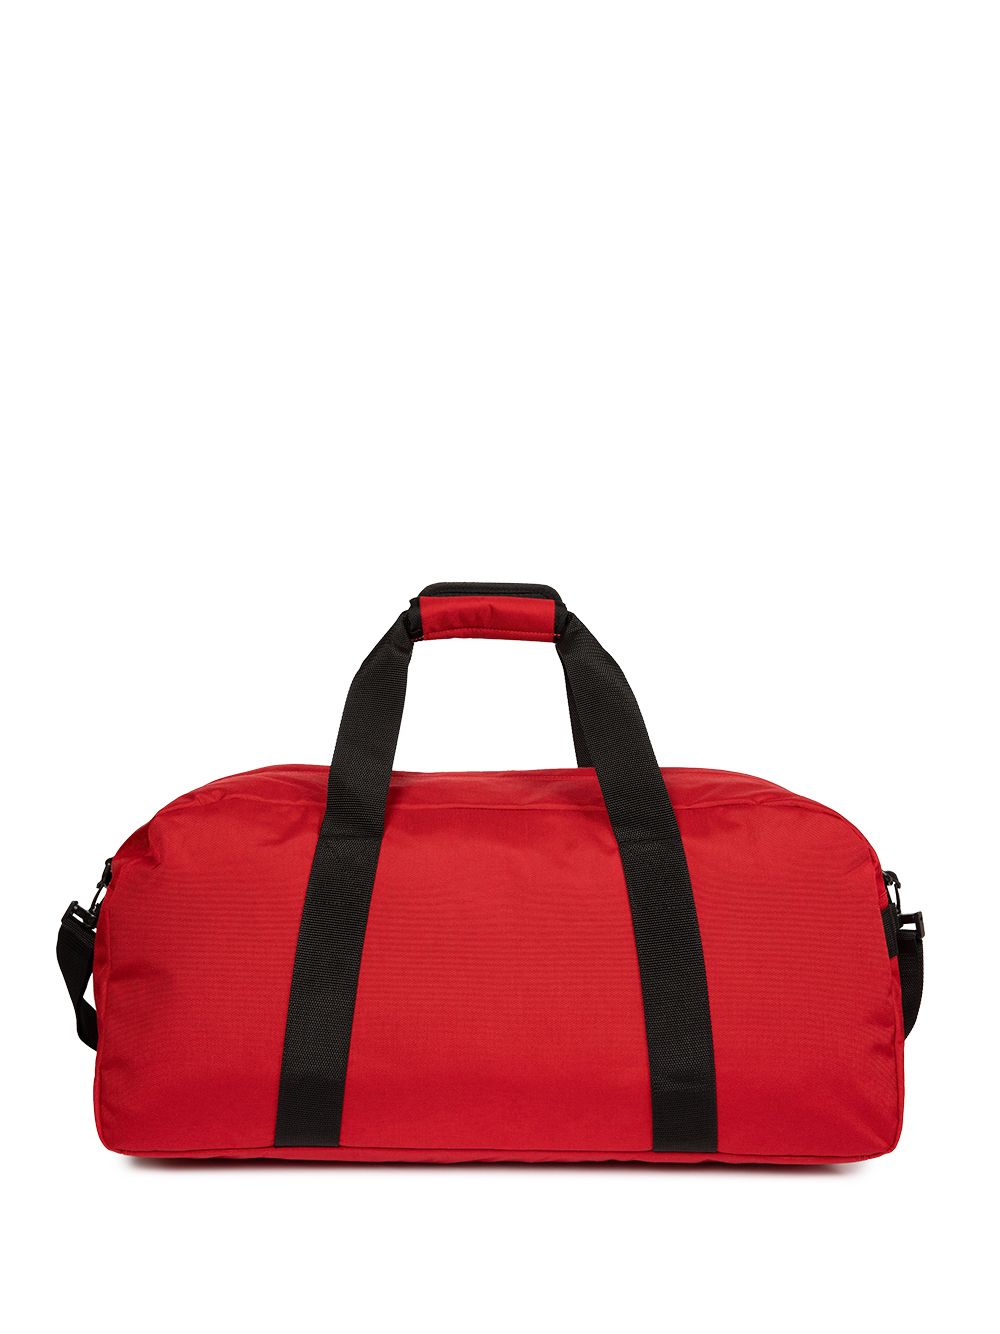 Image 2 of Eastpak x UNDERCOVER sports bag